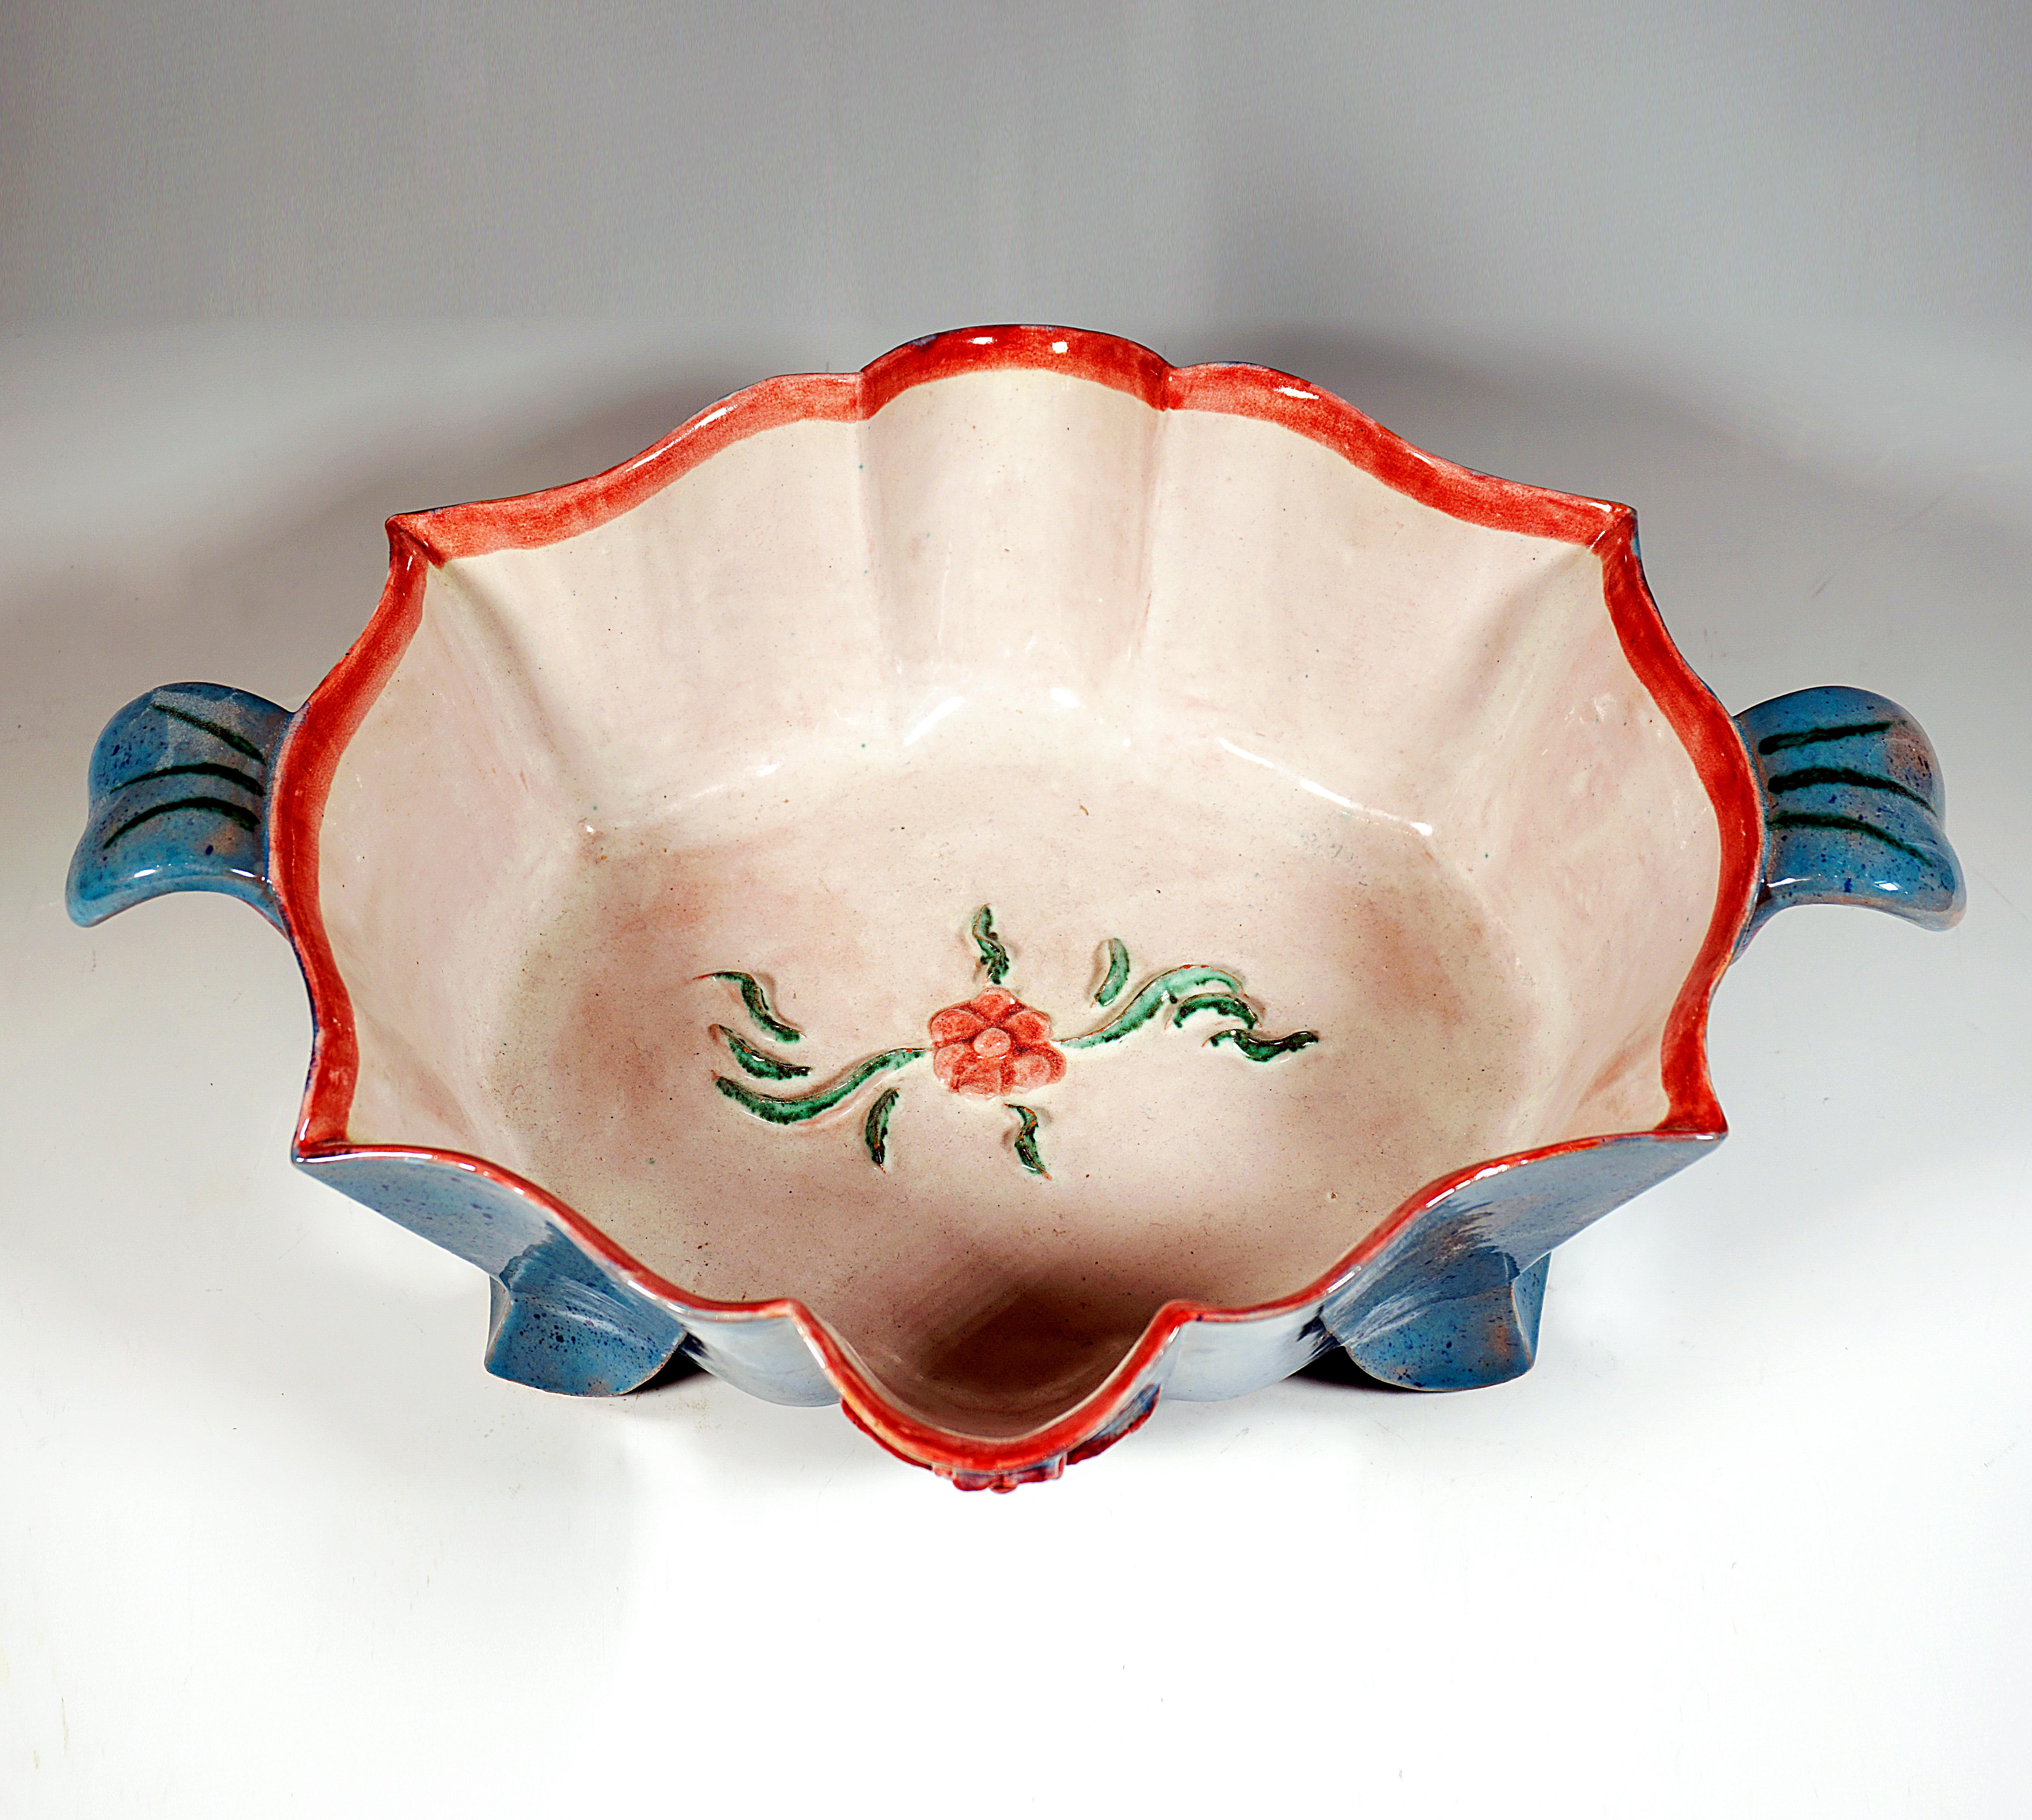 Large bowl on an oval ground plan with flared, wavy and curved walls on four swept-out feet in the shape of leaves, flower and leaf decoration in relief on the bowl base and on the outside, colored glazed in an expressive manner.

Manufactory: